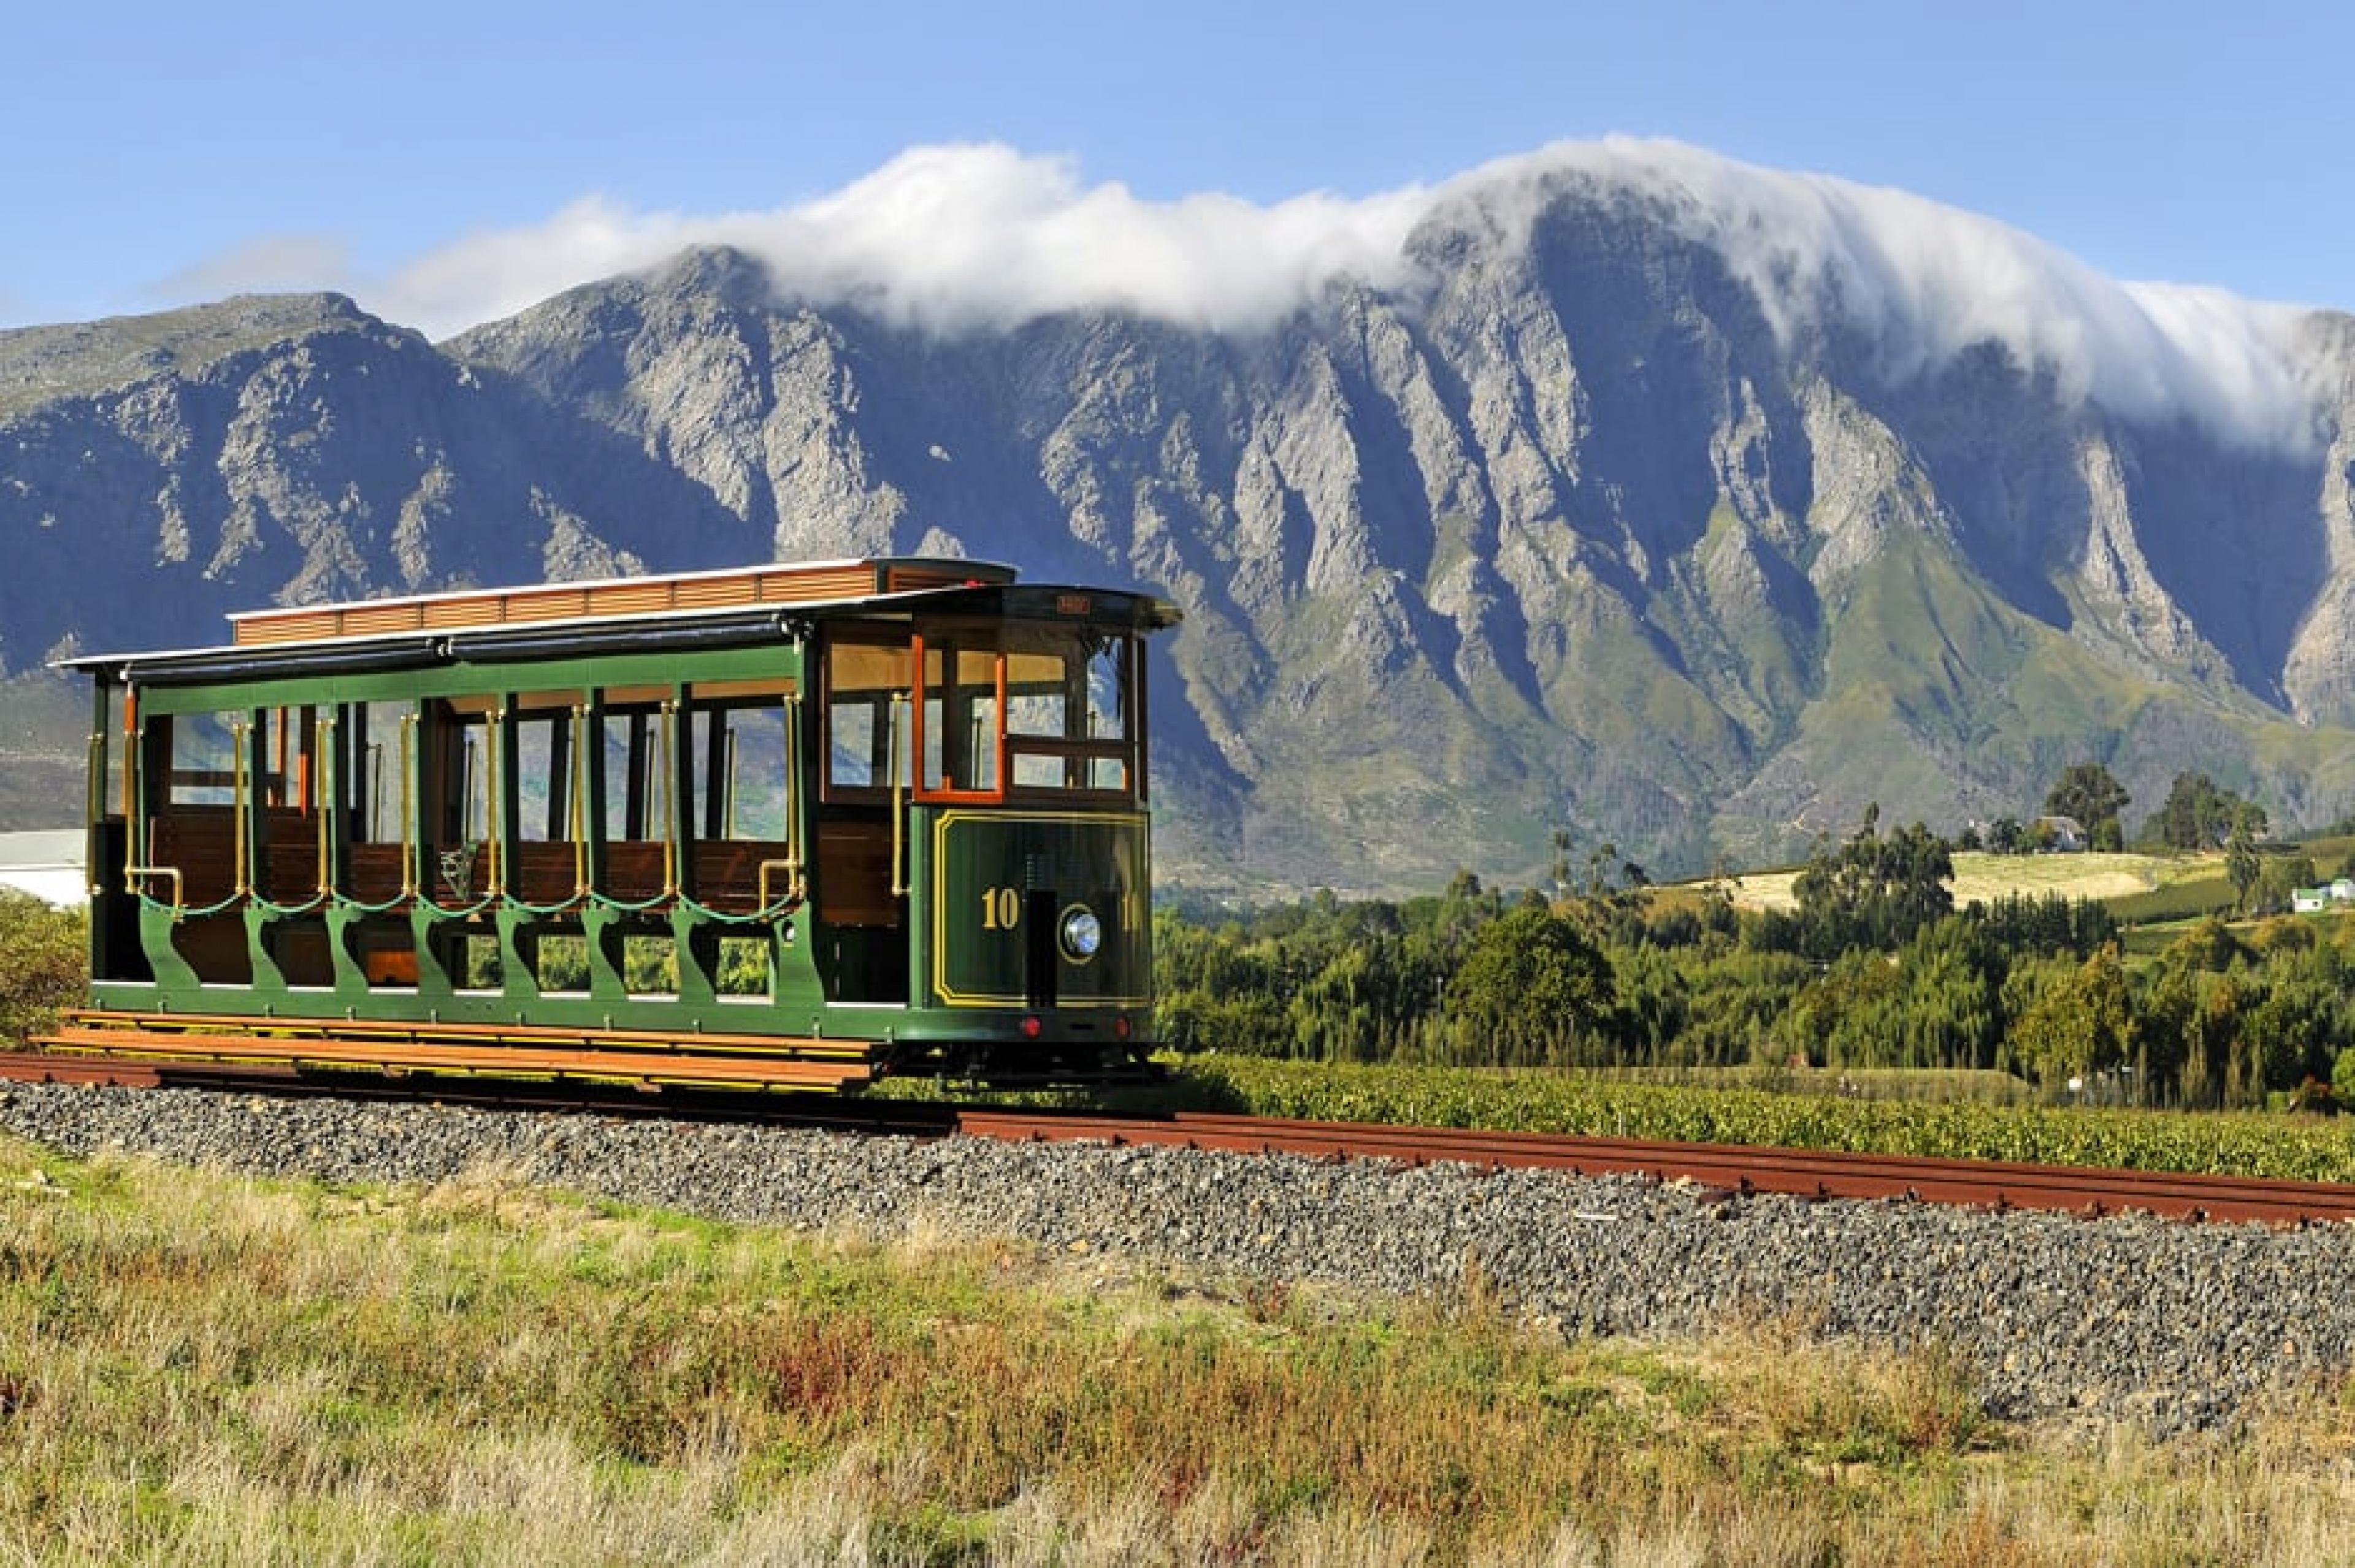 Train at Franschhoek Wine Tram ,South Africa: Winelands, South Africa